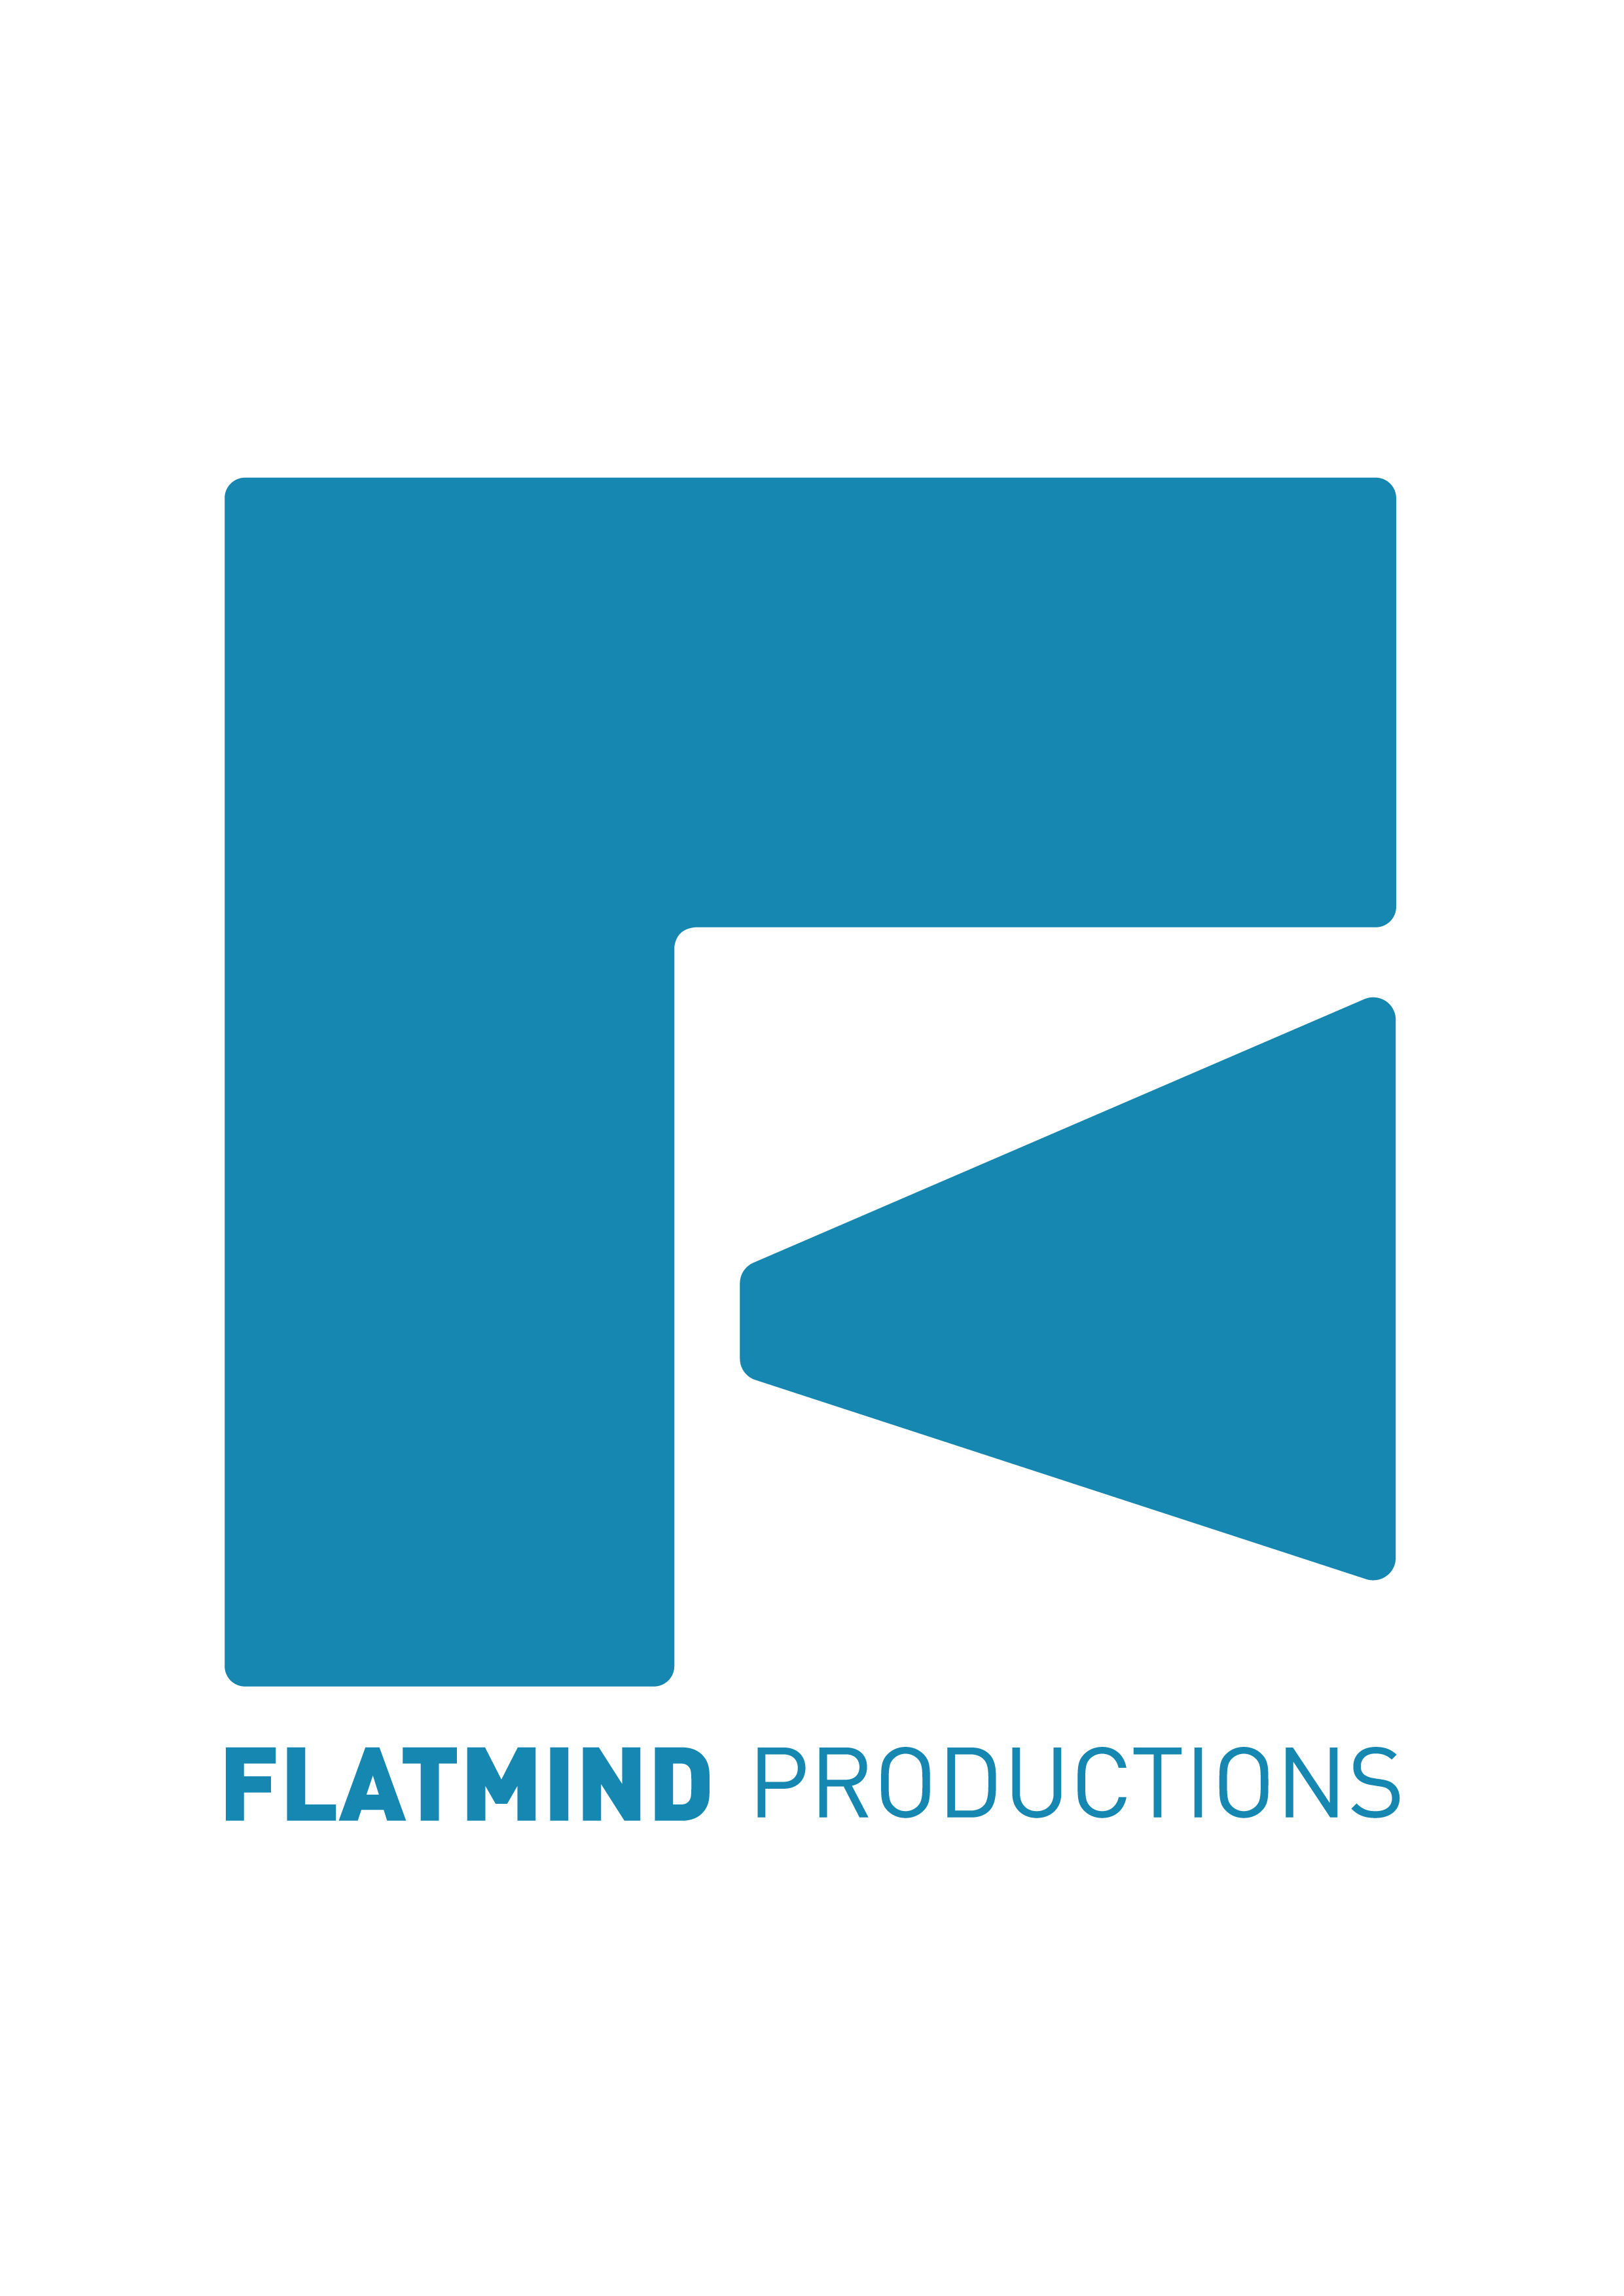 FLATMIND Productions